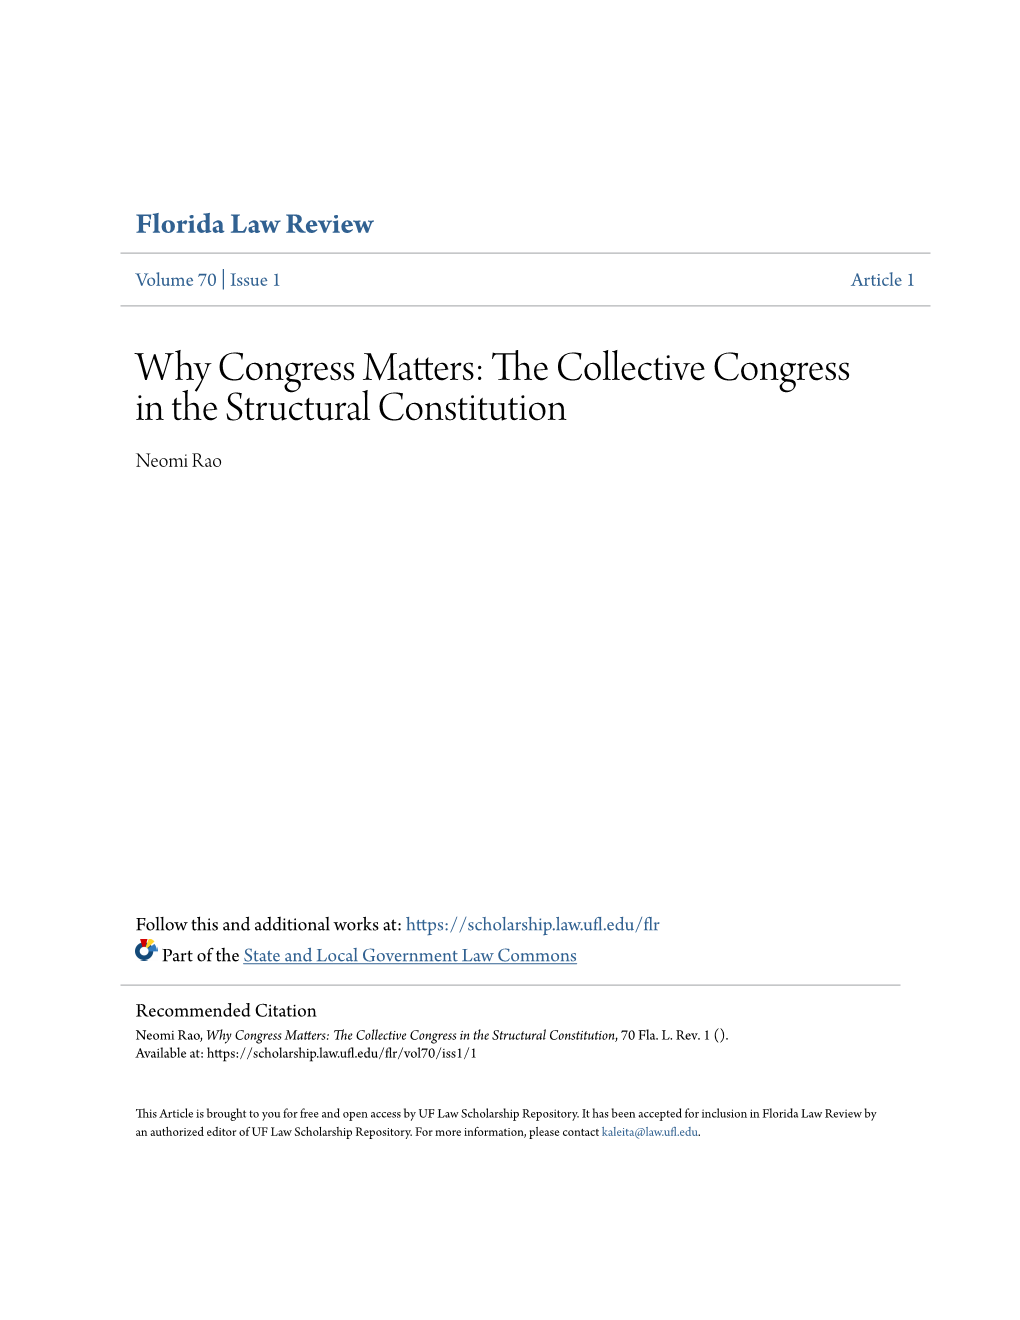 The Collective Congress in the Structural Constitution, 70 Fla